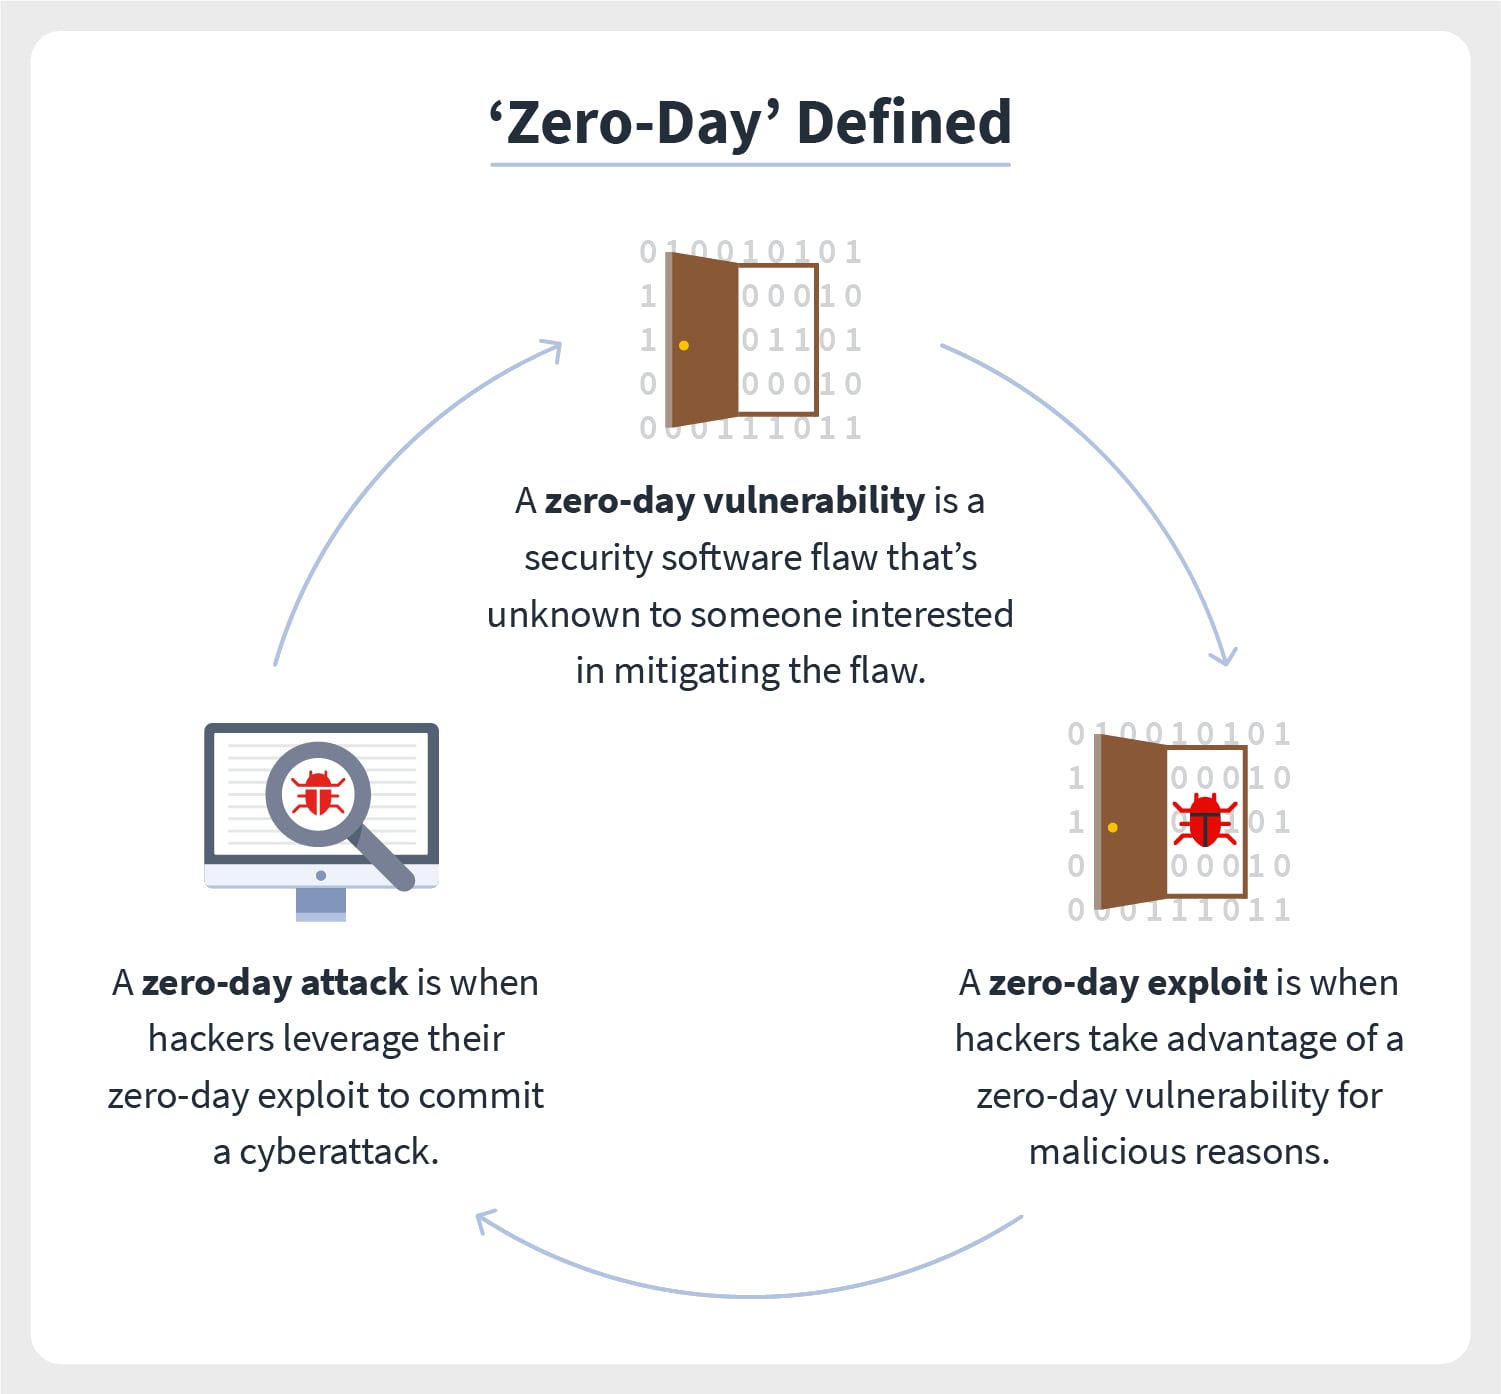 an open door, followed by an open door with a bug in it, followed by a screen with a magnifying glass over a bug provides the definitions of a zero-day vulnerability, a zero-day exploit, and a zero-day attack